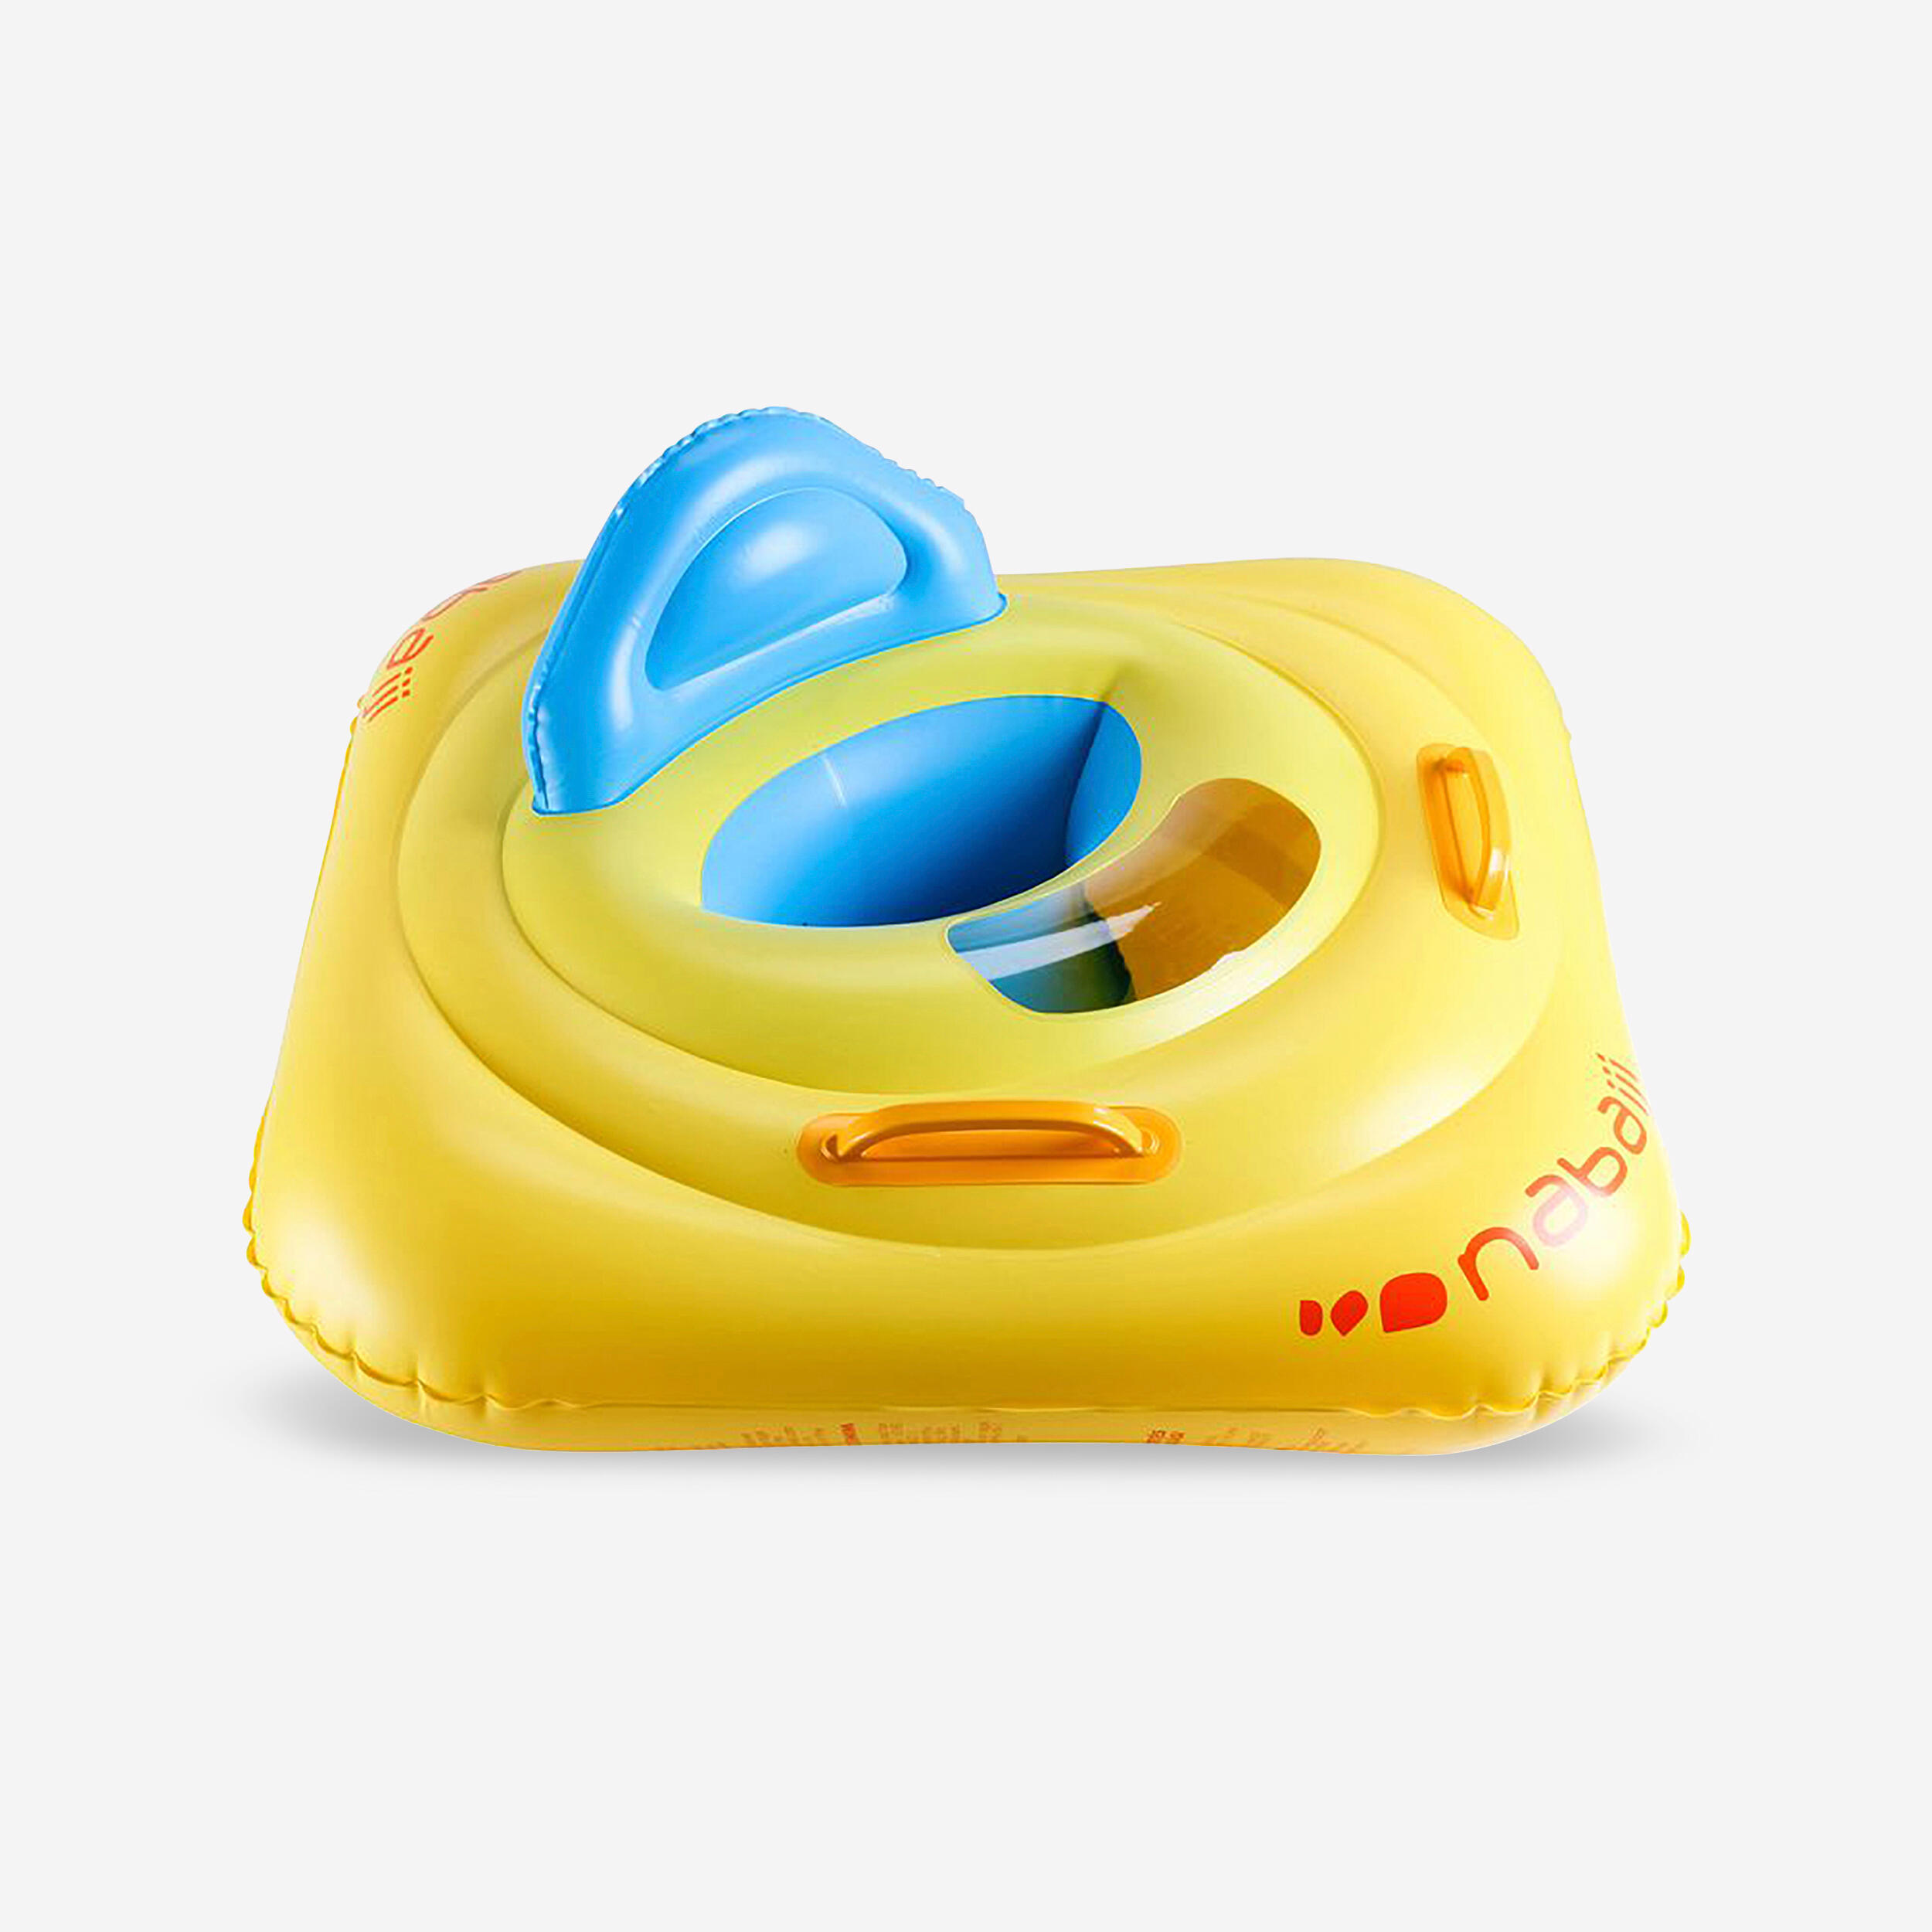 Inflatable baby seat buoy for swimming pool with porthole with handles 7-11 kg 1/6